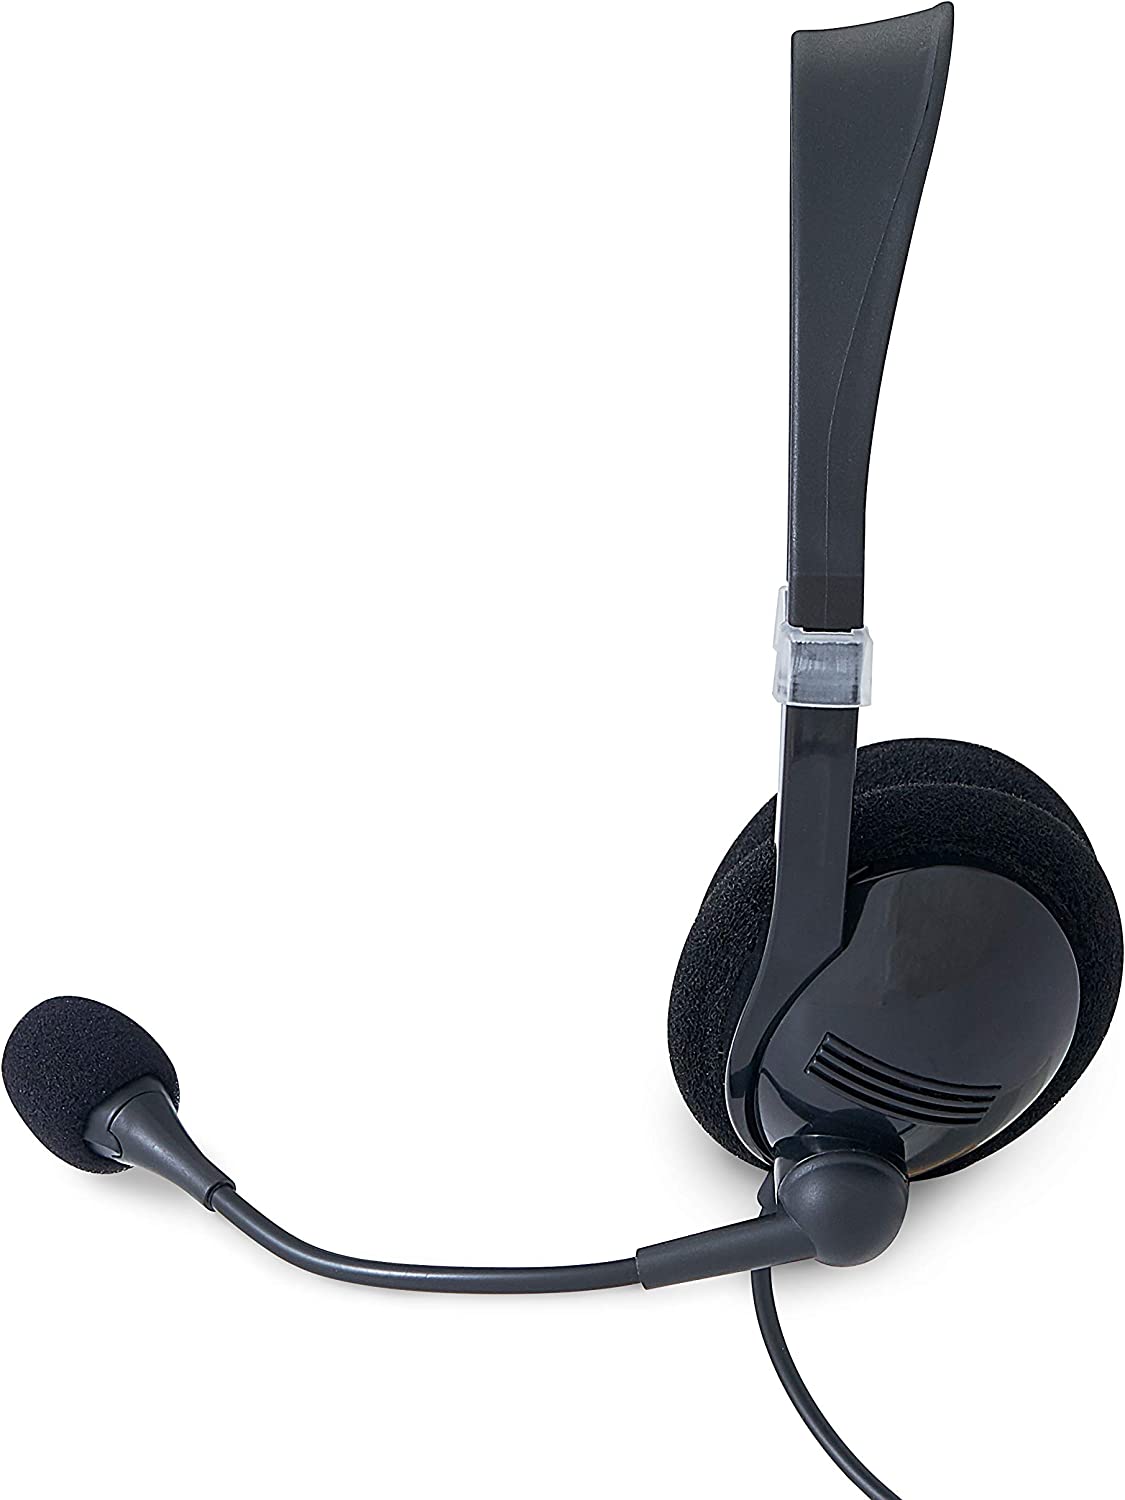 Verbatim Stereo USB Headset with Microphone and in-Line Remote Stereo w/In-Line Remote